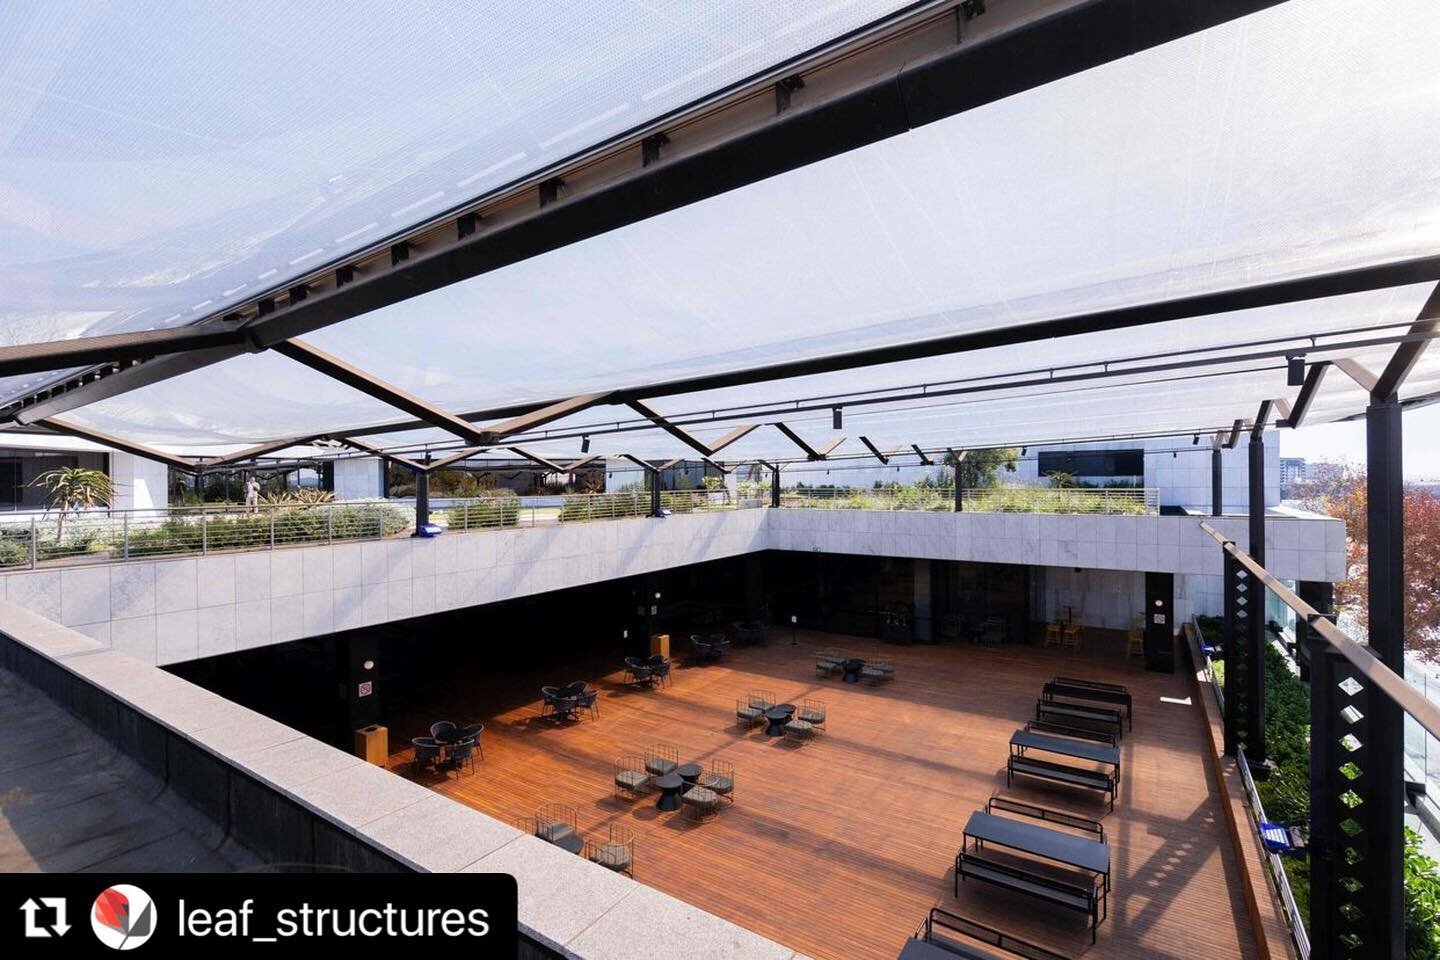 #Repost @leaf_structures with @make_repost
・・・
Investec ETFE pergola😊

Another successful collaboration by the project team at Investec Sandton project. The 790m&sup2; Investec ETFE pergola is completed and what a transformation. It&rsquo;s a great 